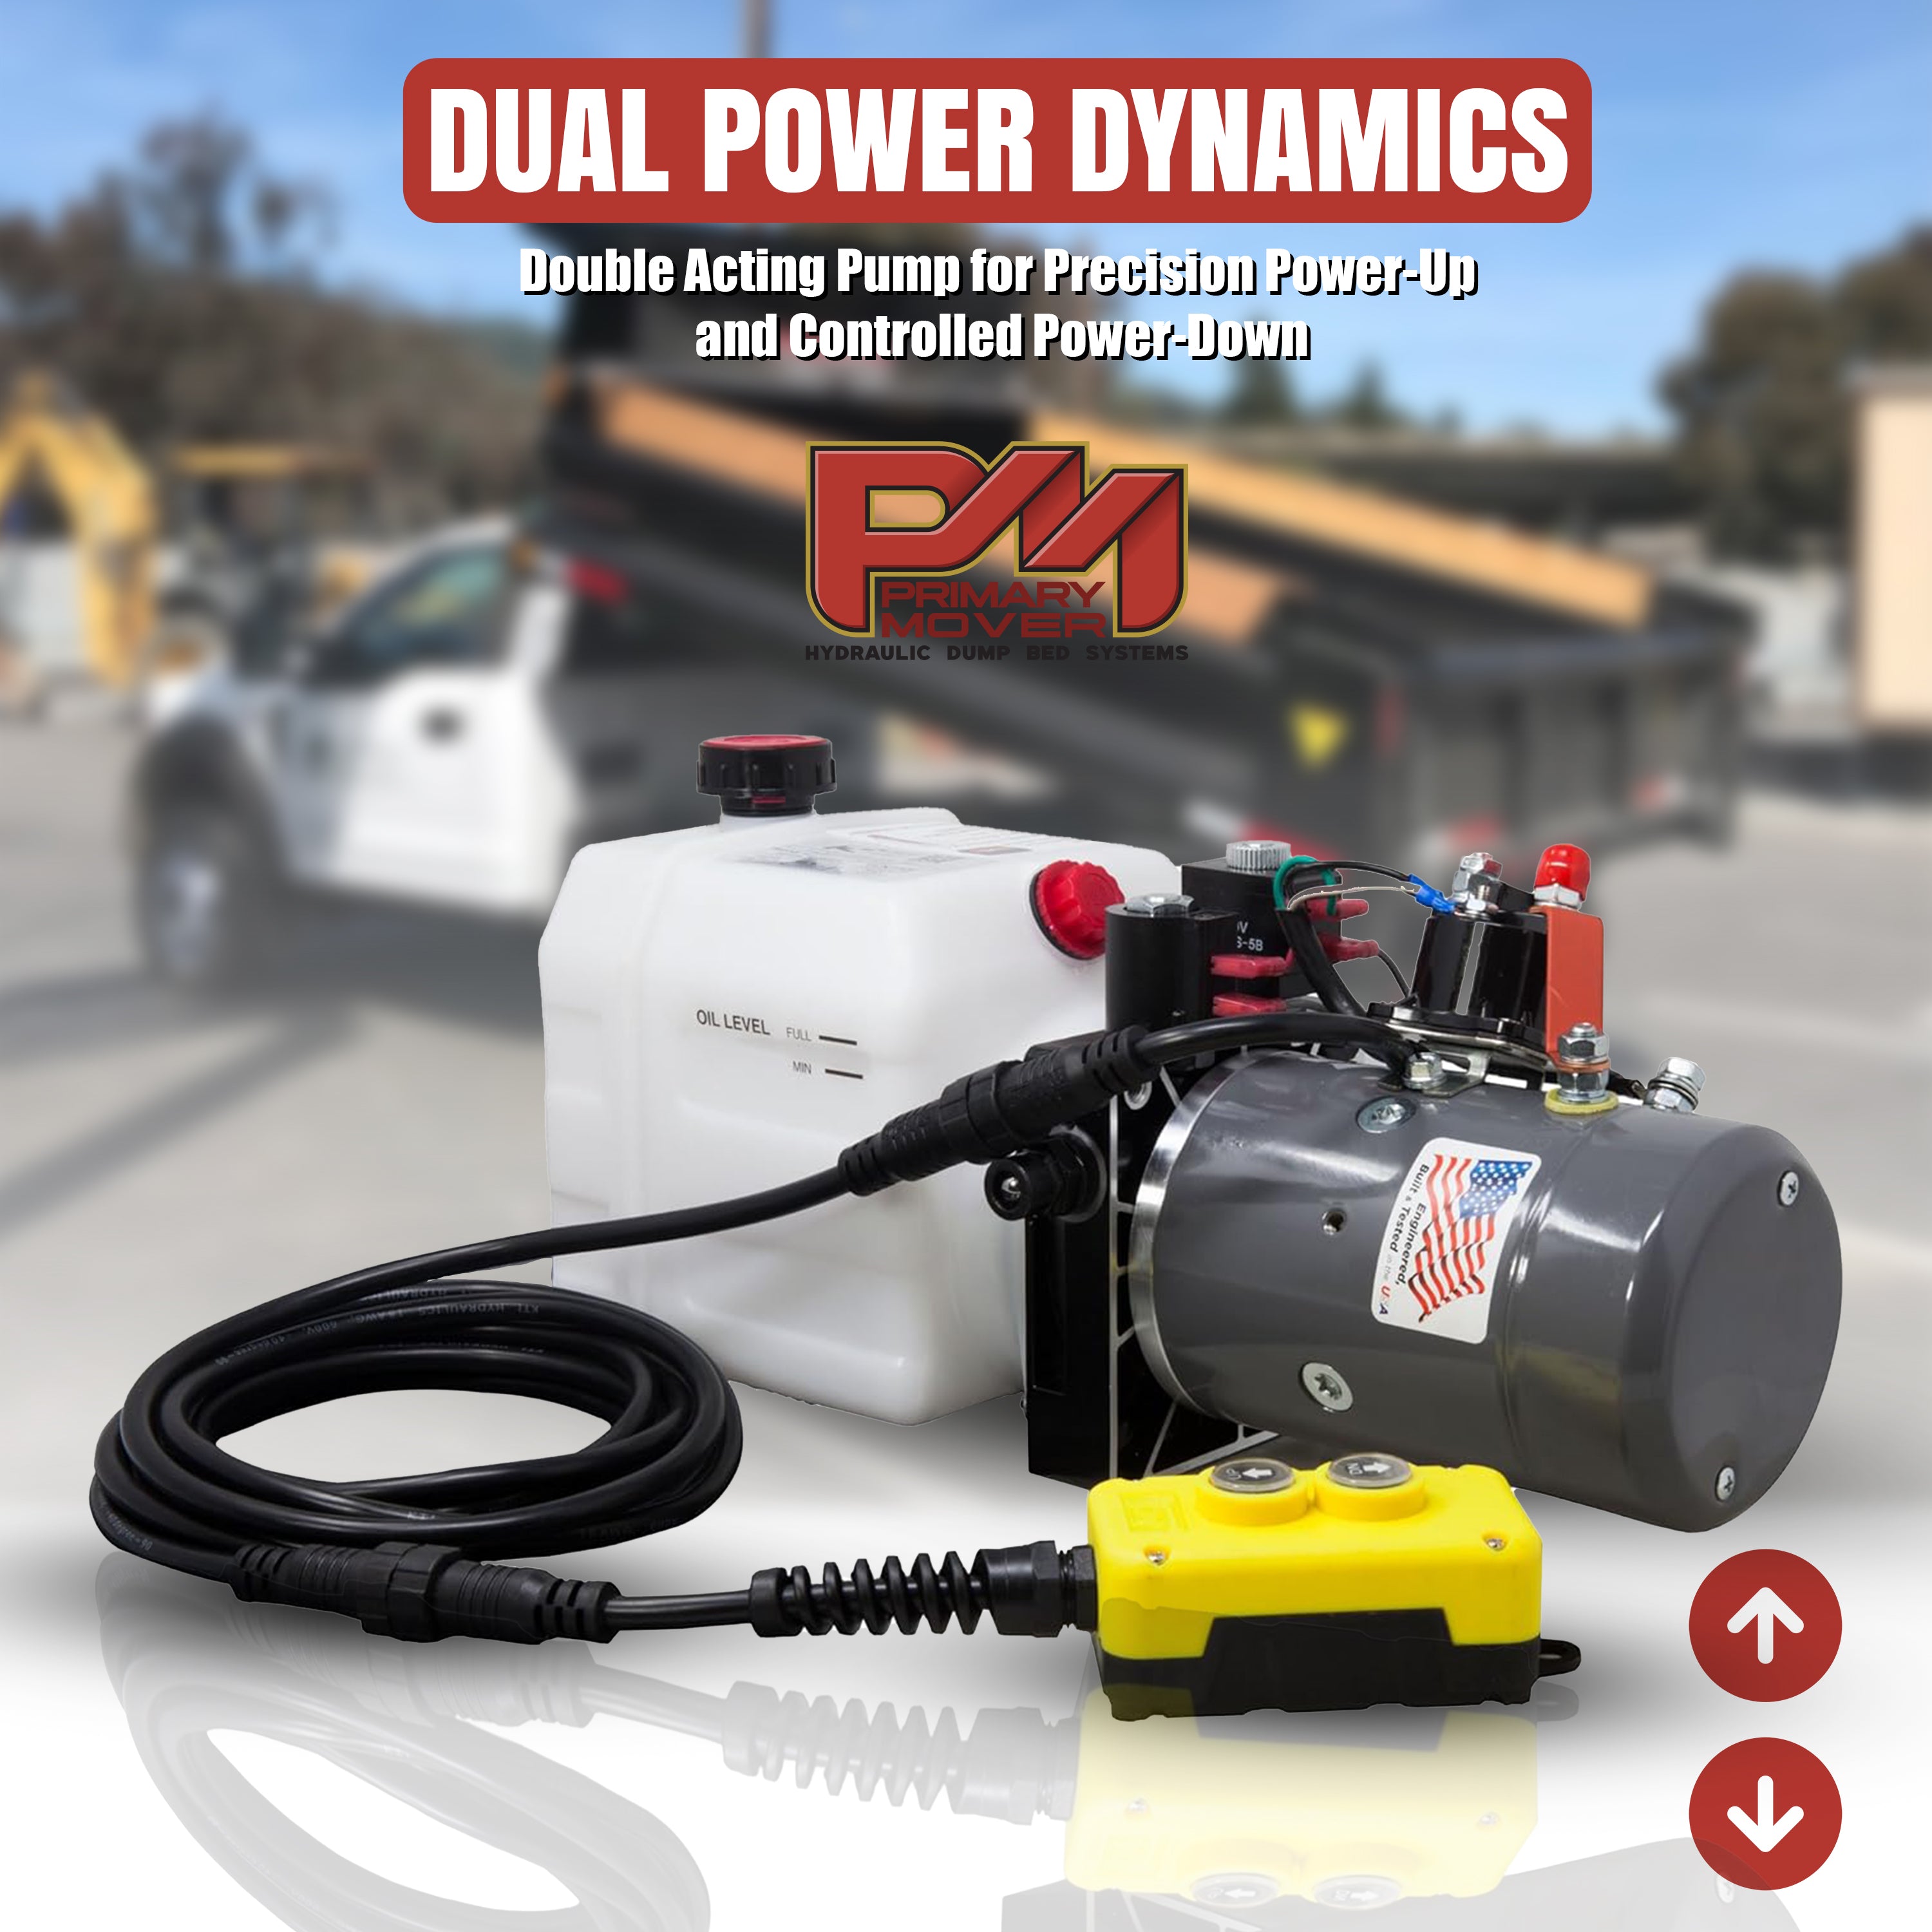 Primary Mover Hydraulic Trailer Jack with 12,000 lb. lifting capacity, dual holding valve, zinc-plated components for durability, and adjustable height for versatile towing needs.